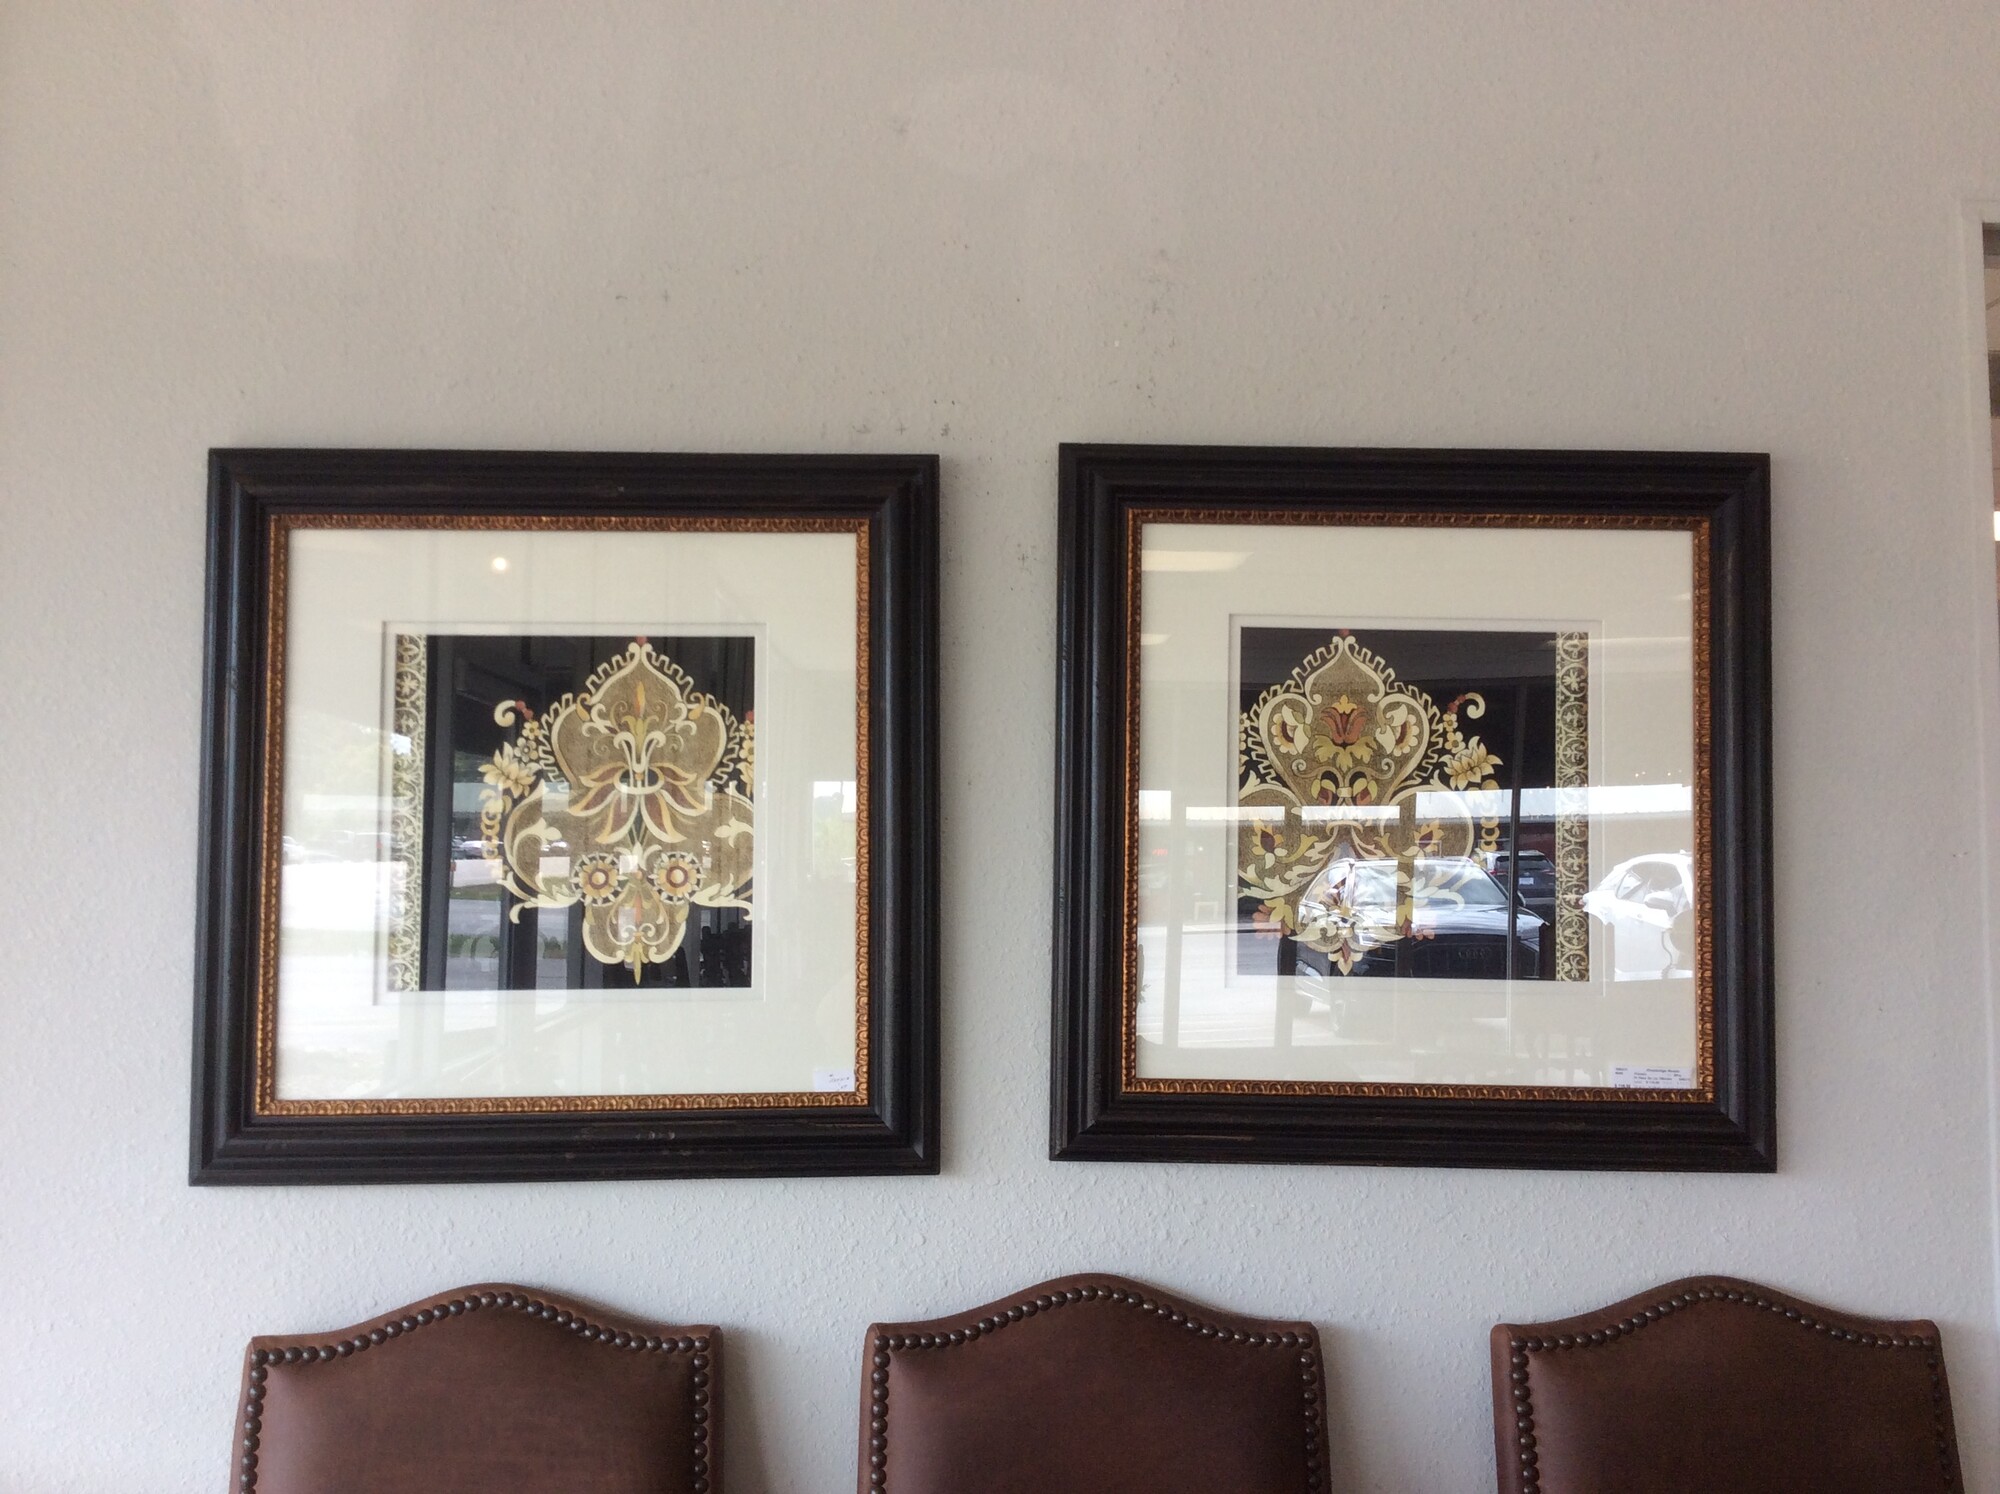 This is a pair of Fleur De Lis pictures, framed in a gold and black frame.